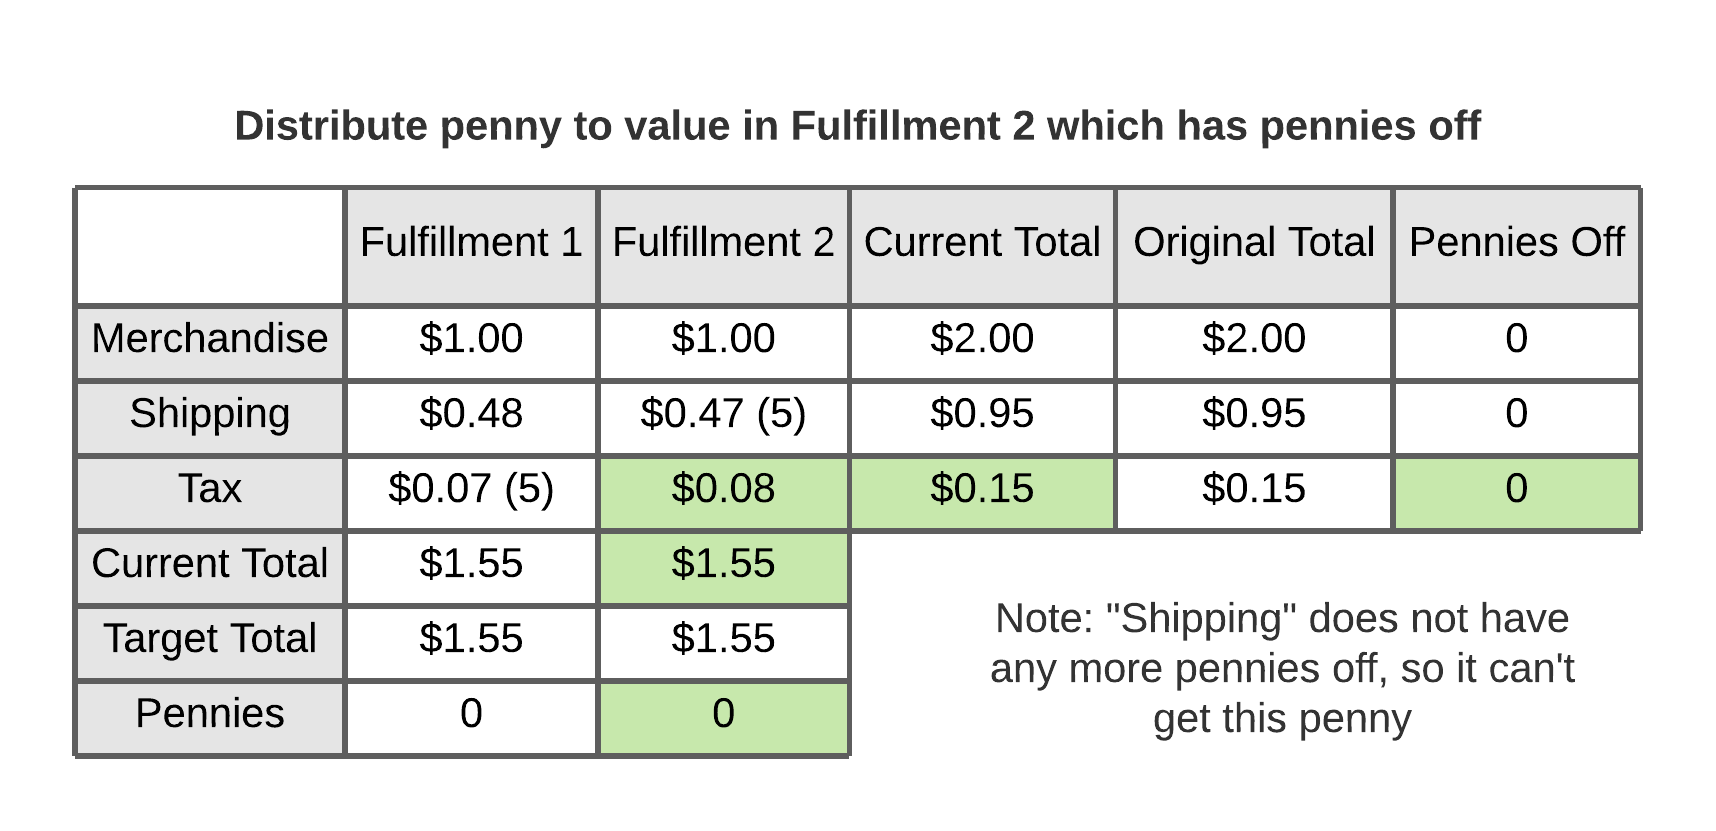 Distribute penny to value in Fulfillment 2 which has pennies off